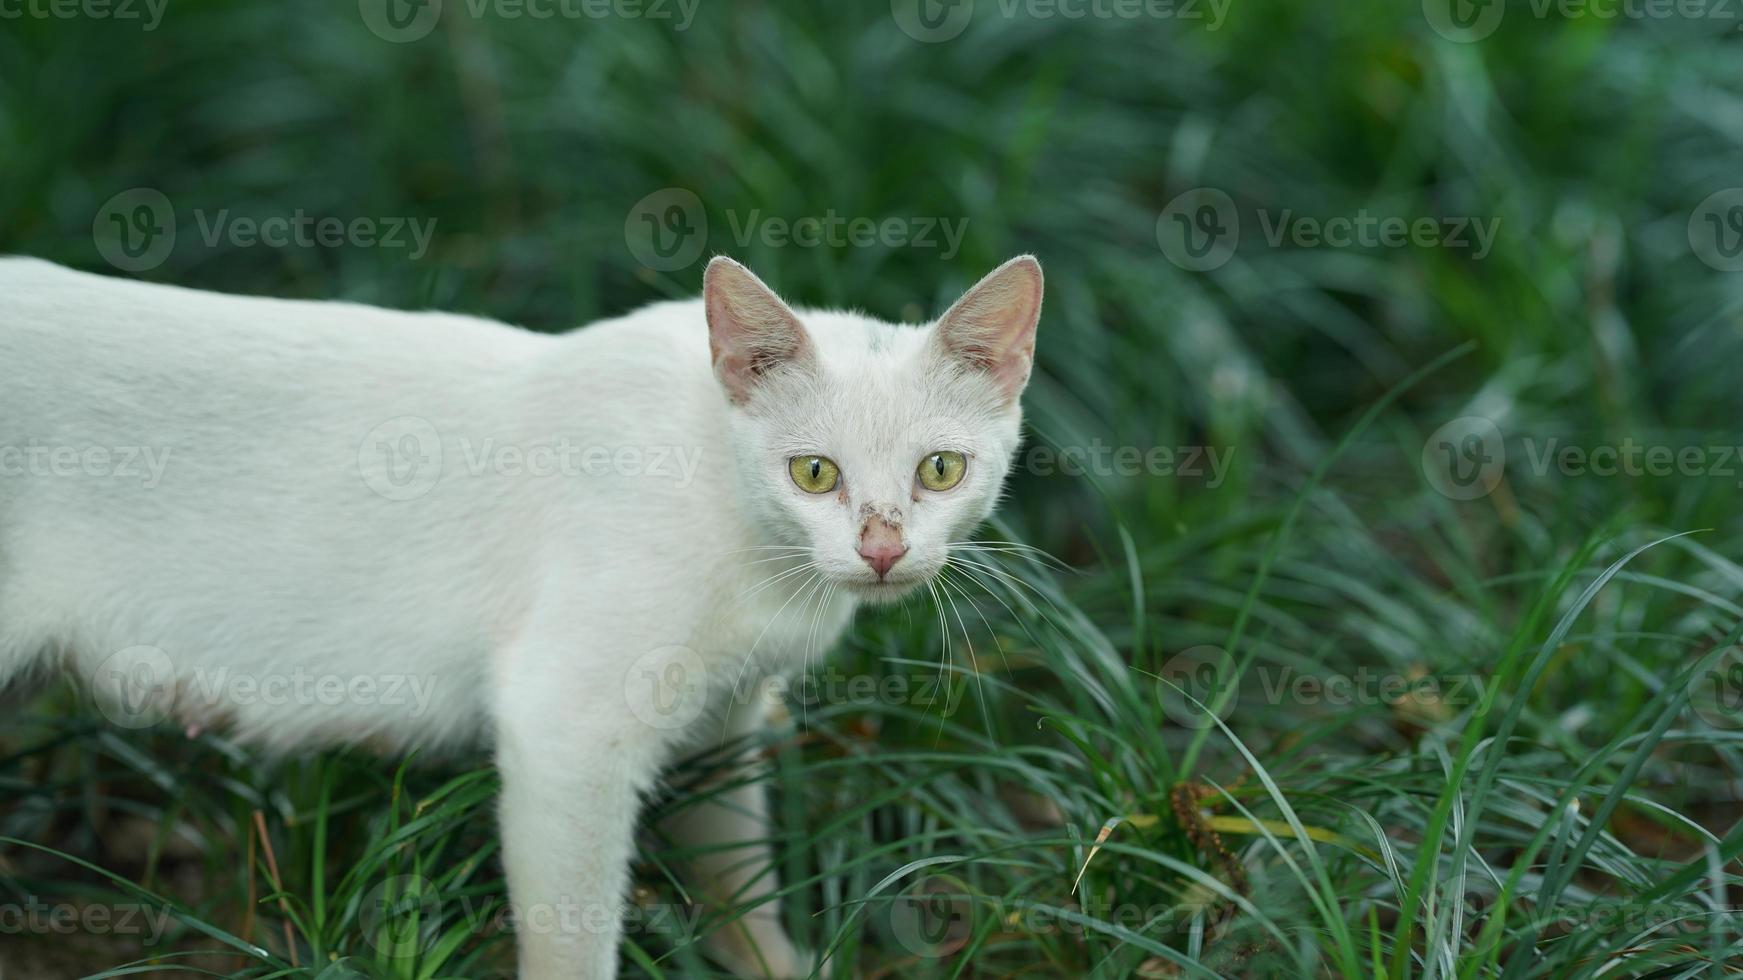 The cute cat with the round eyes and lovely face photo